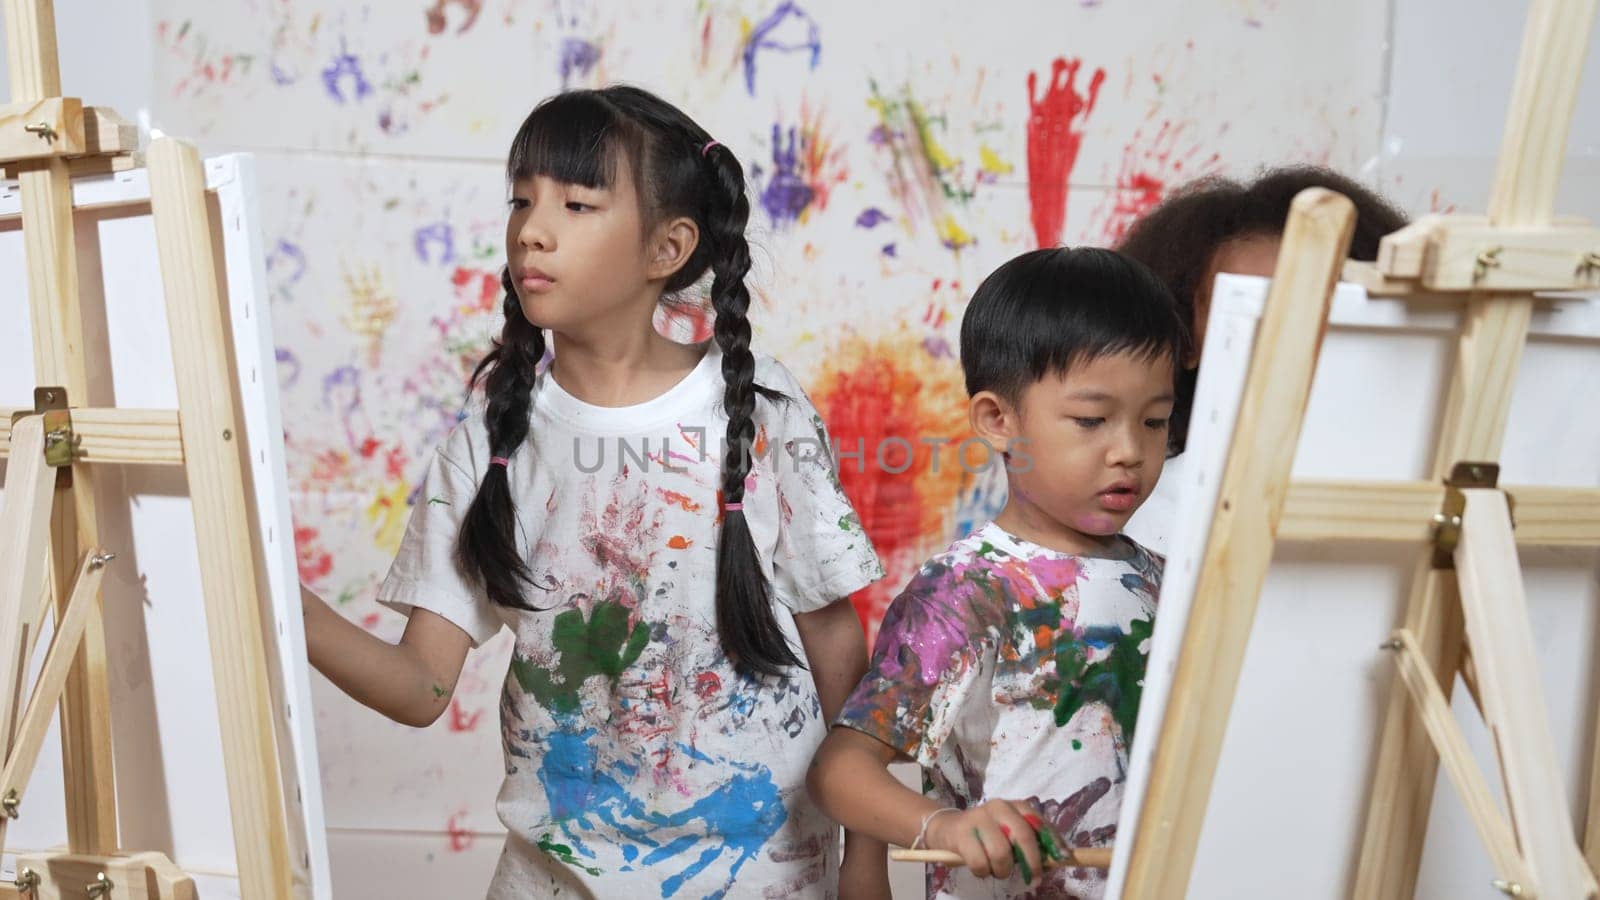 Playful student painted or draw canvas at stained wall with diverse friends in art lesson. Group of happy multicultural children working or create artwork at messy room. Creative activity. Erudition.